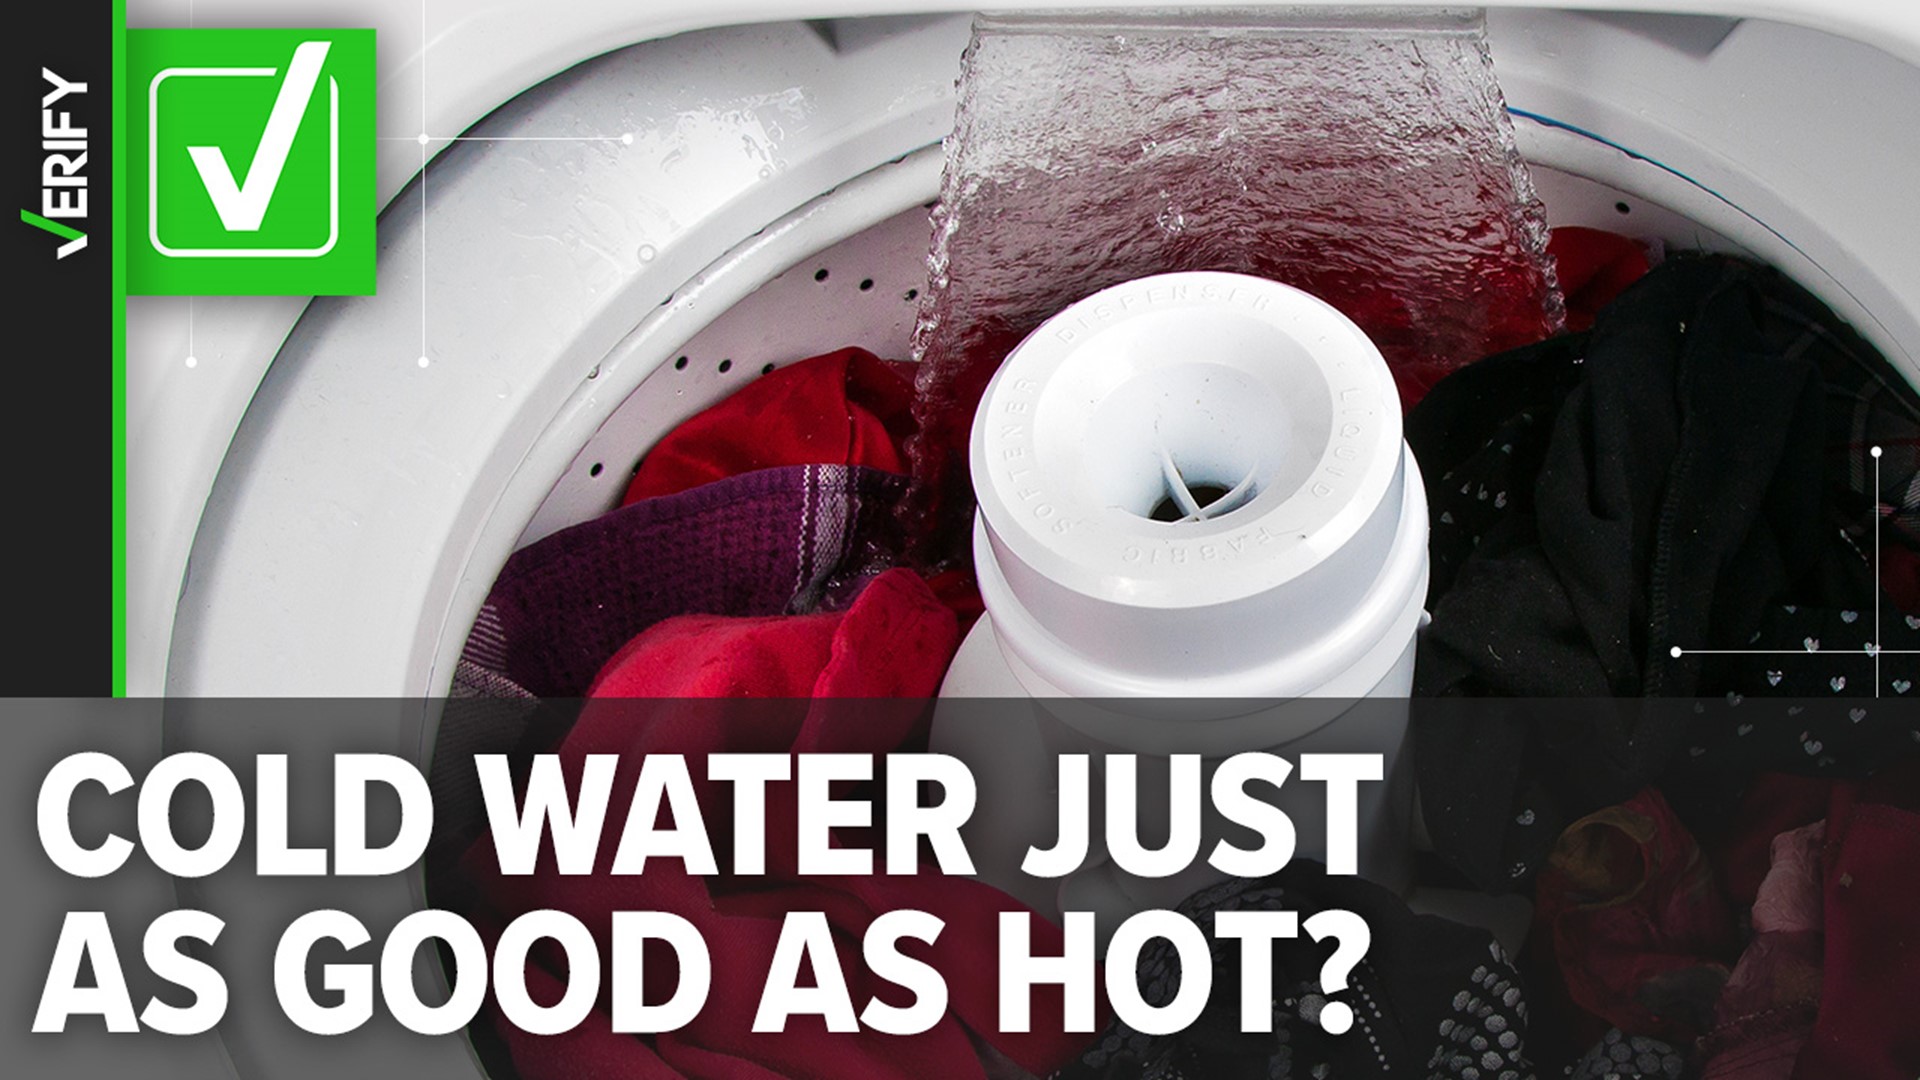 Don't Bother Using Hot Water to Wash Your Laundry - Consumer Reports